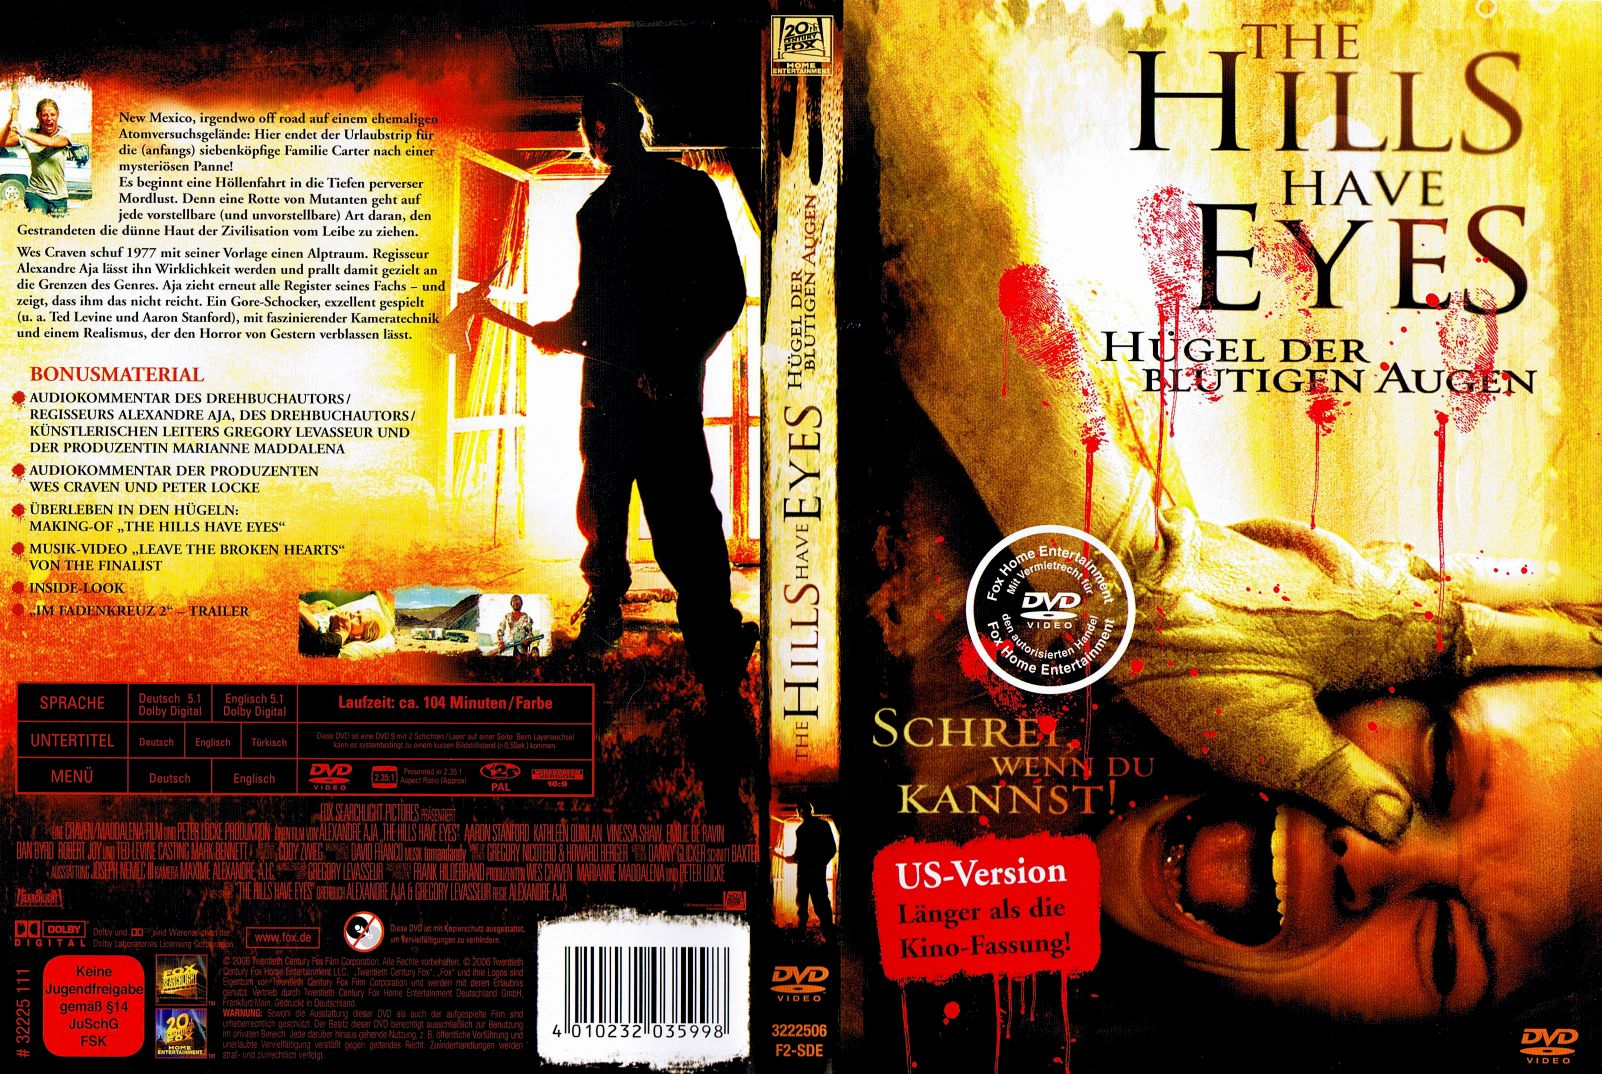 The Hills Have Eyes 1 (2006)